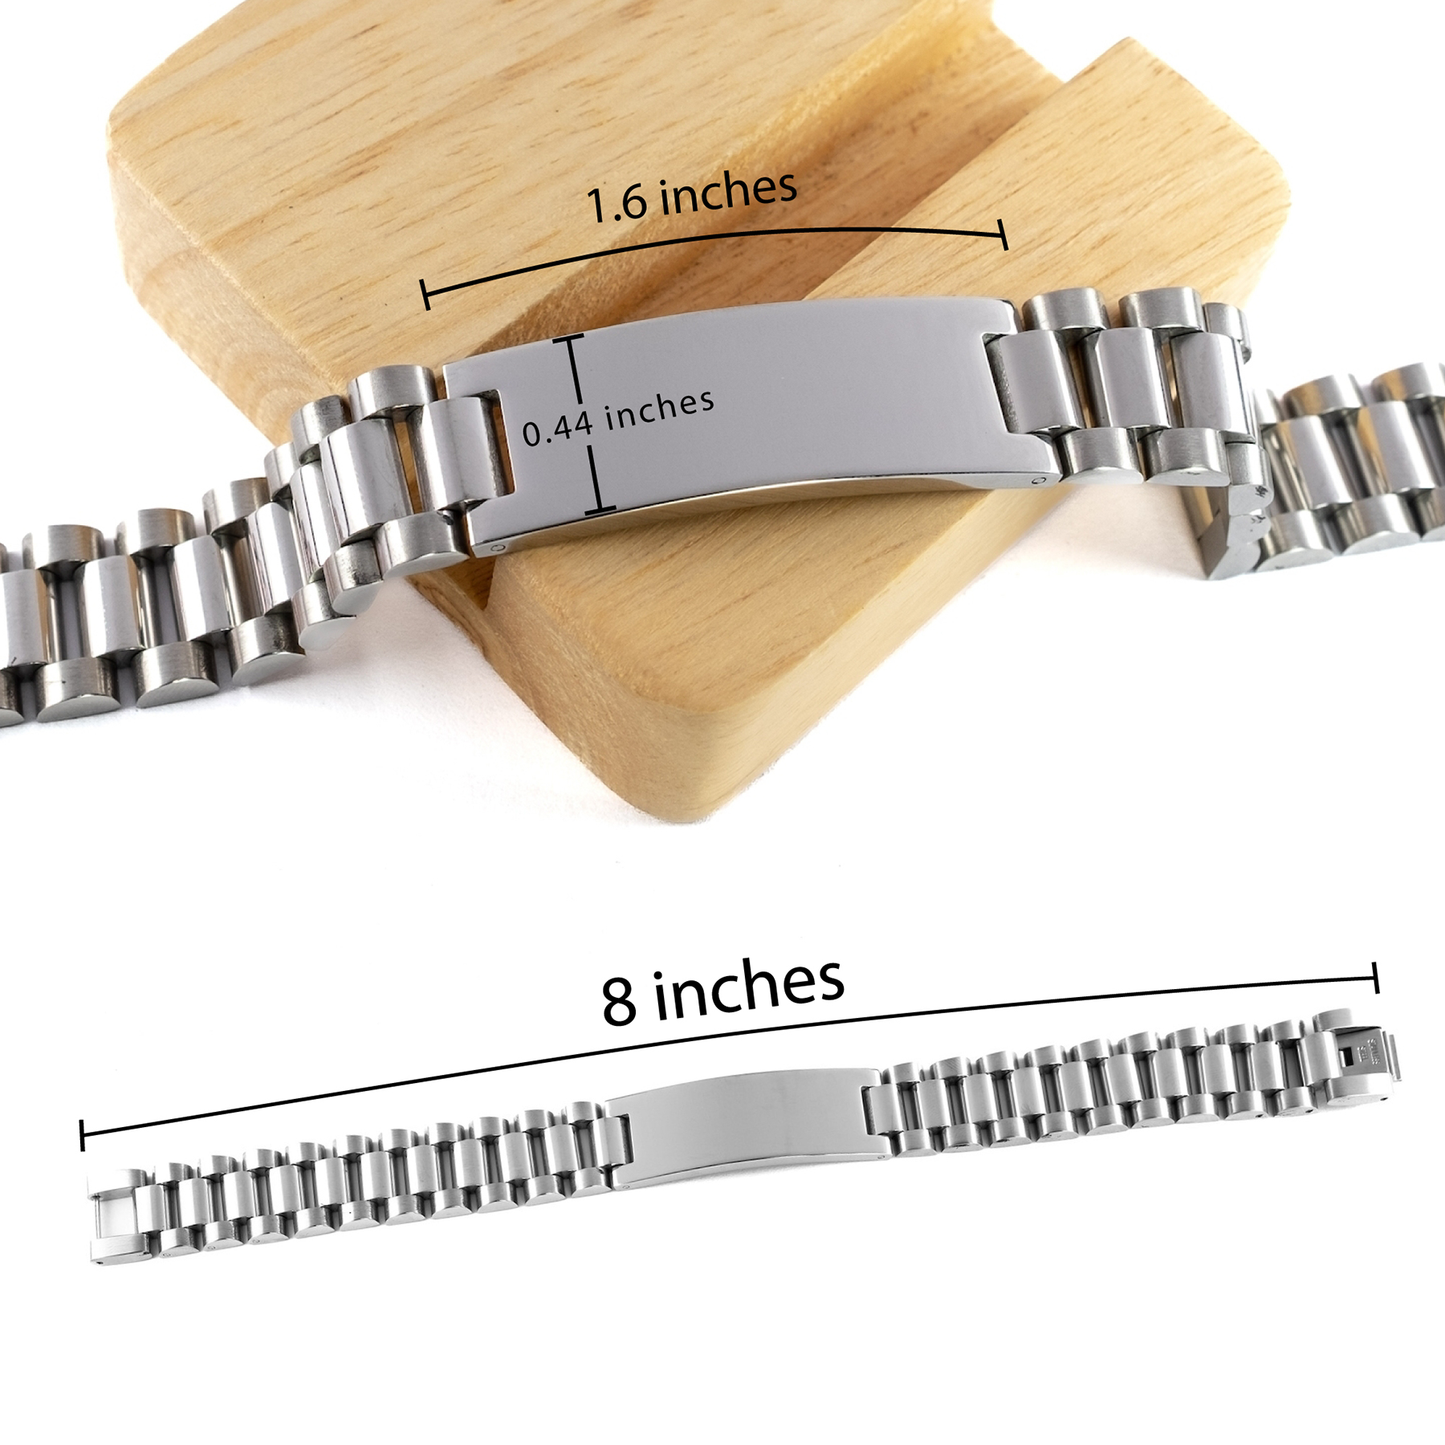 Wife Appreciation Gifts, I am grateful, thankful, and blessed, Thank You Ladder Stainless Steel Bracelet for Wife, Birthday Inspiration Gifts for Wife